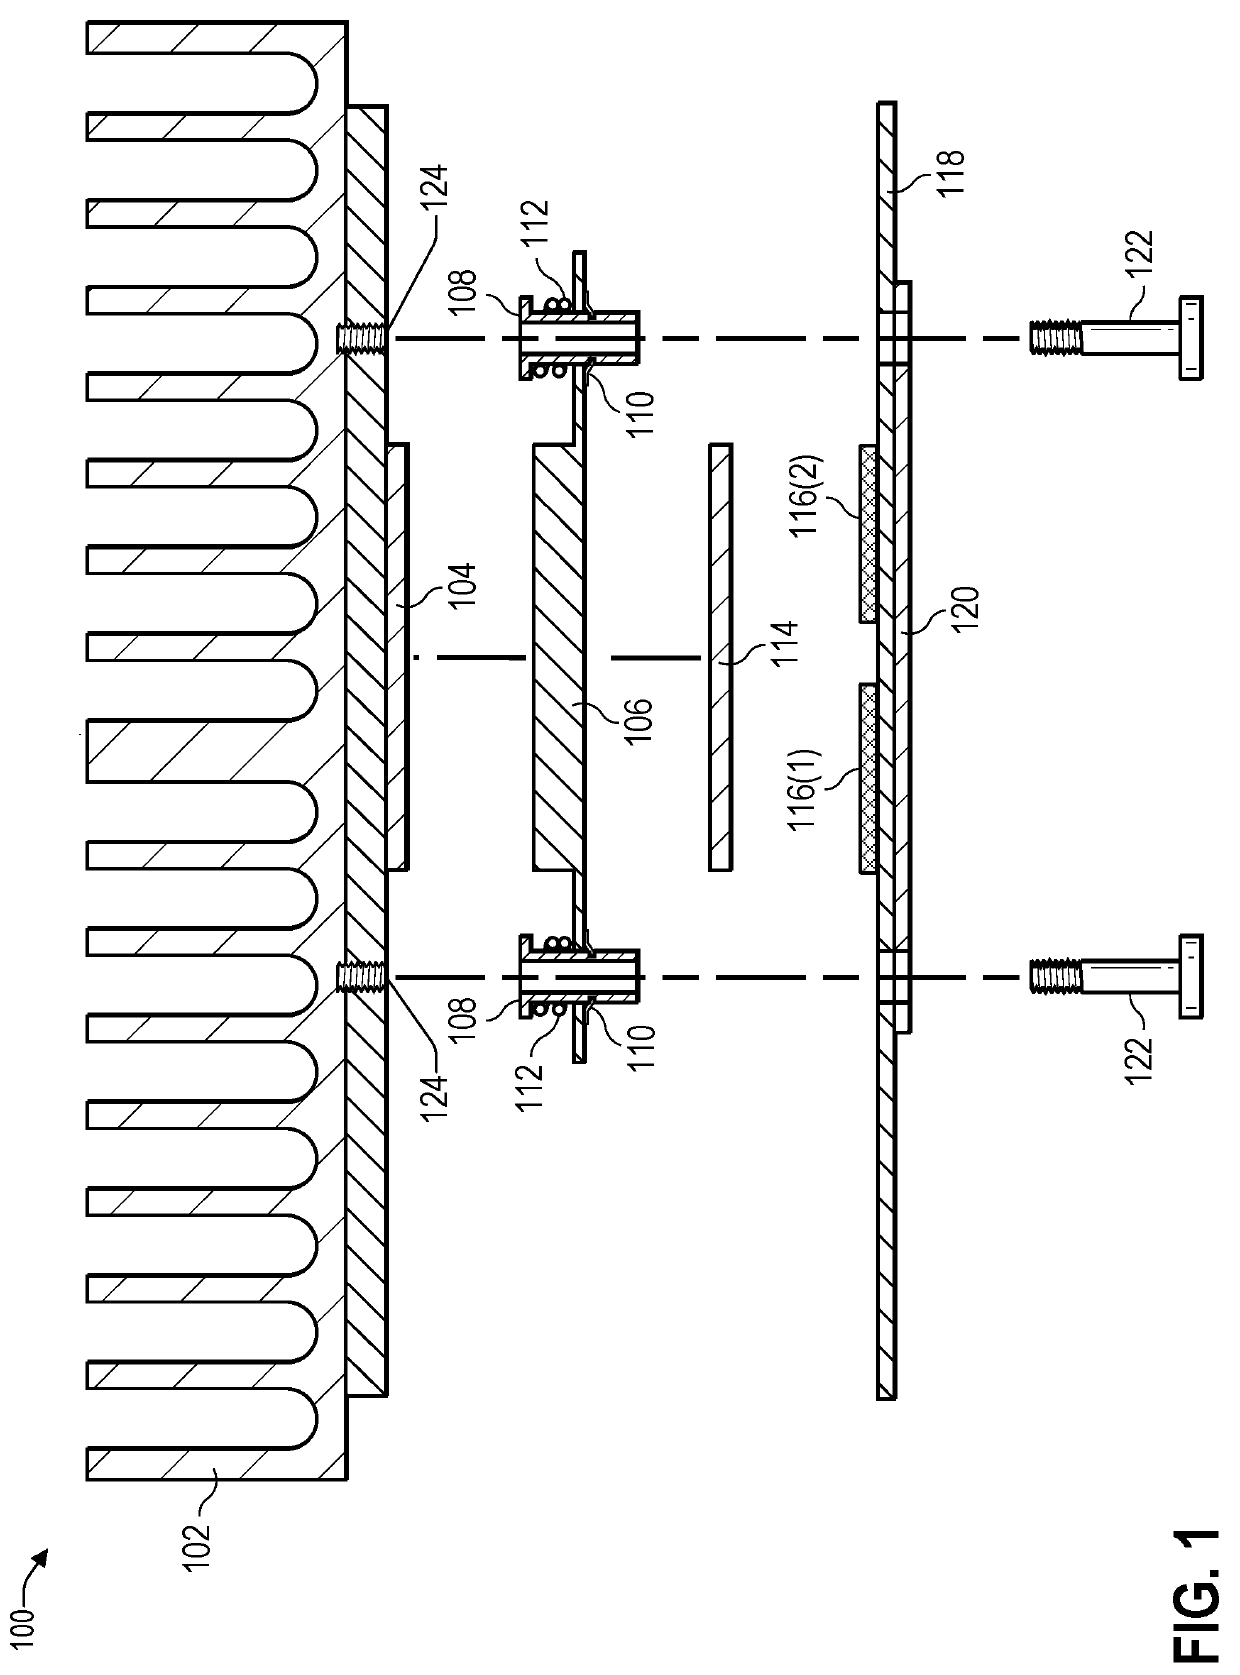 Heatsink mounting system to maintain a relatively uniform amount of pressure on components of a circuit board